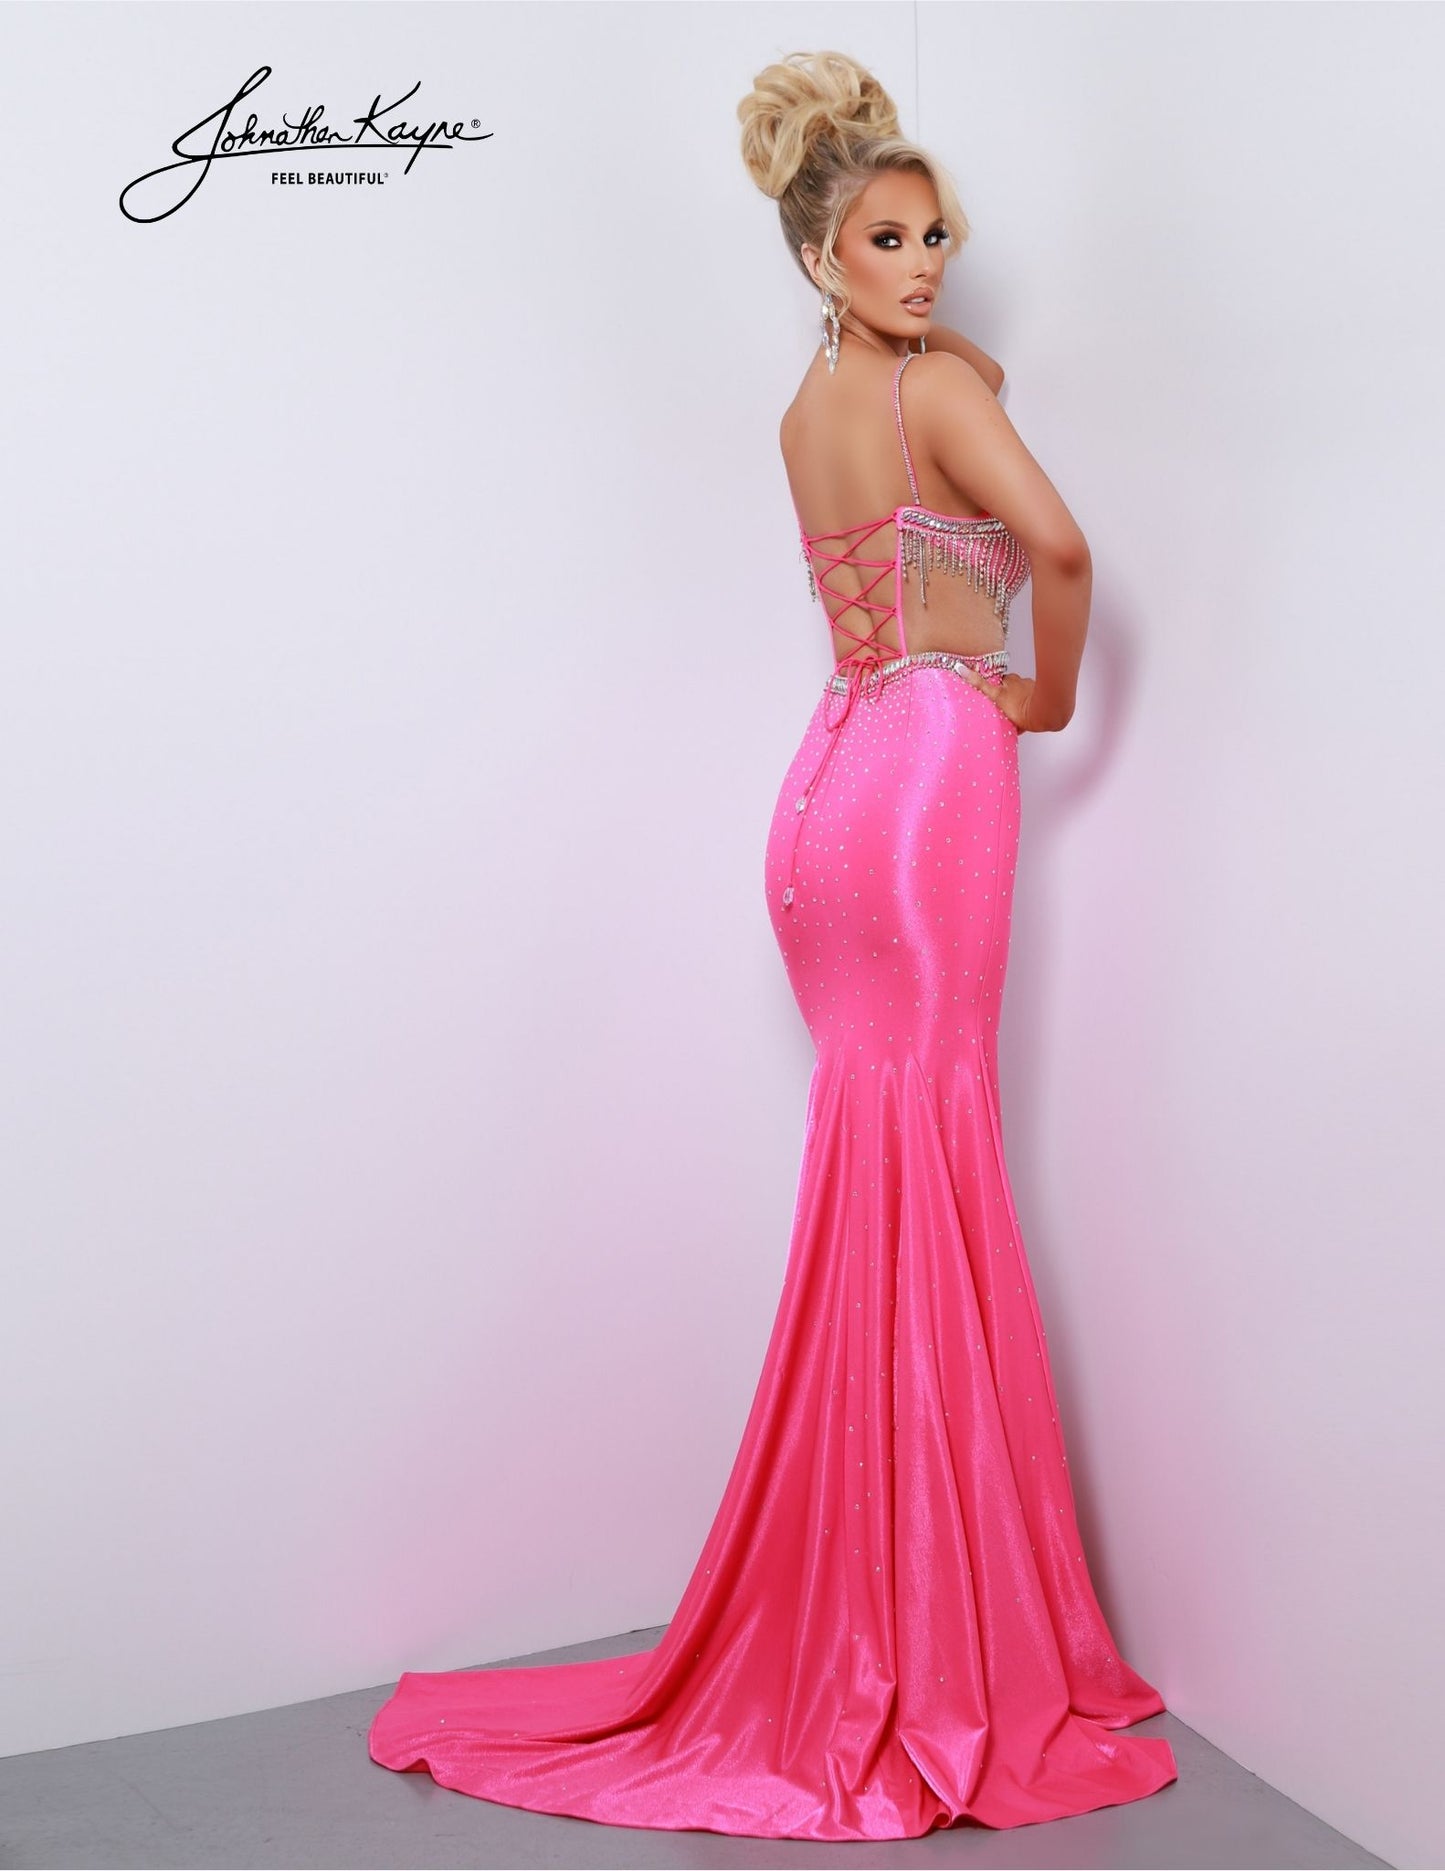 Look elegant and feel your best in this Johnathan Kayne 2876 Long Prom Dress. Featuring a corset-style bodice with a plunging V neckline and a high slit, this pageant gown is sure to leave a lasting impression. The open back and cut out details give the dress a modern flair. Perfect for prom or any formal occasion. Prepare to shine and shimmy into the spotlight in our 4-Way Stretch Lycra gown. The rhinestone fringe bodice adds a touch of sparkle and movement that's perfect for the dance floor.